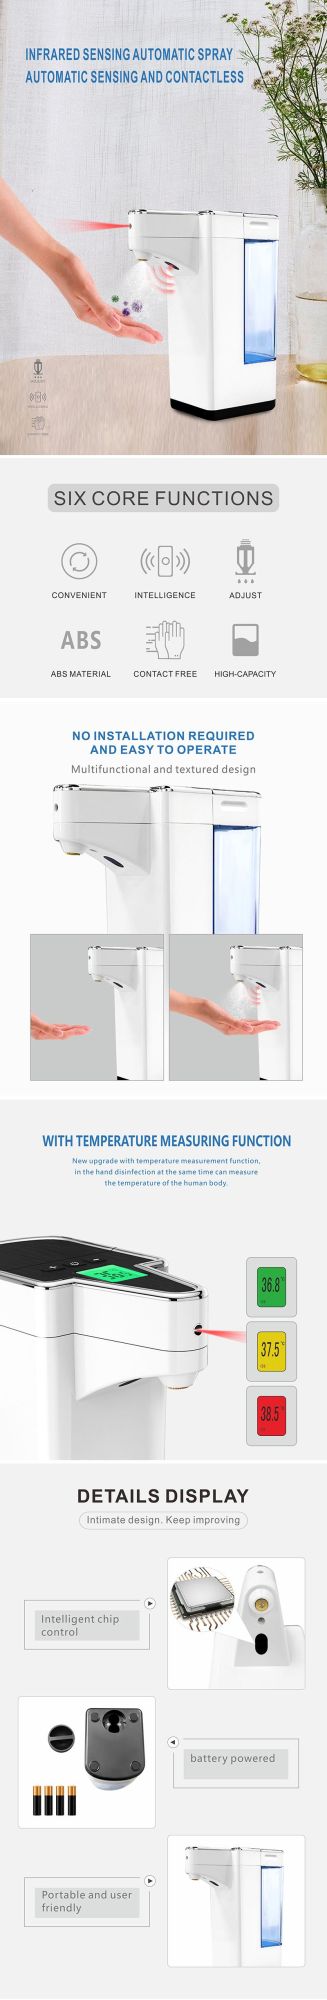 CE Certified 2 in 1 Automatic Non-Contact Digital Thermometer for Hand Washing and Free Disinfection Soap Dispenser